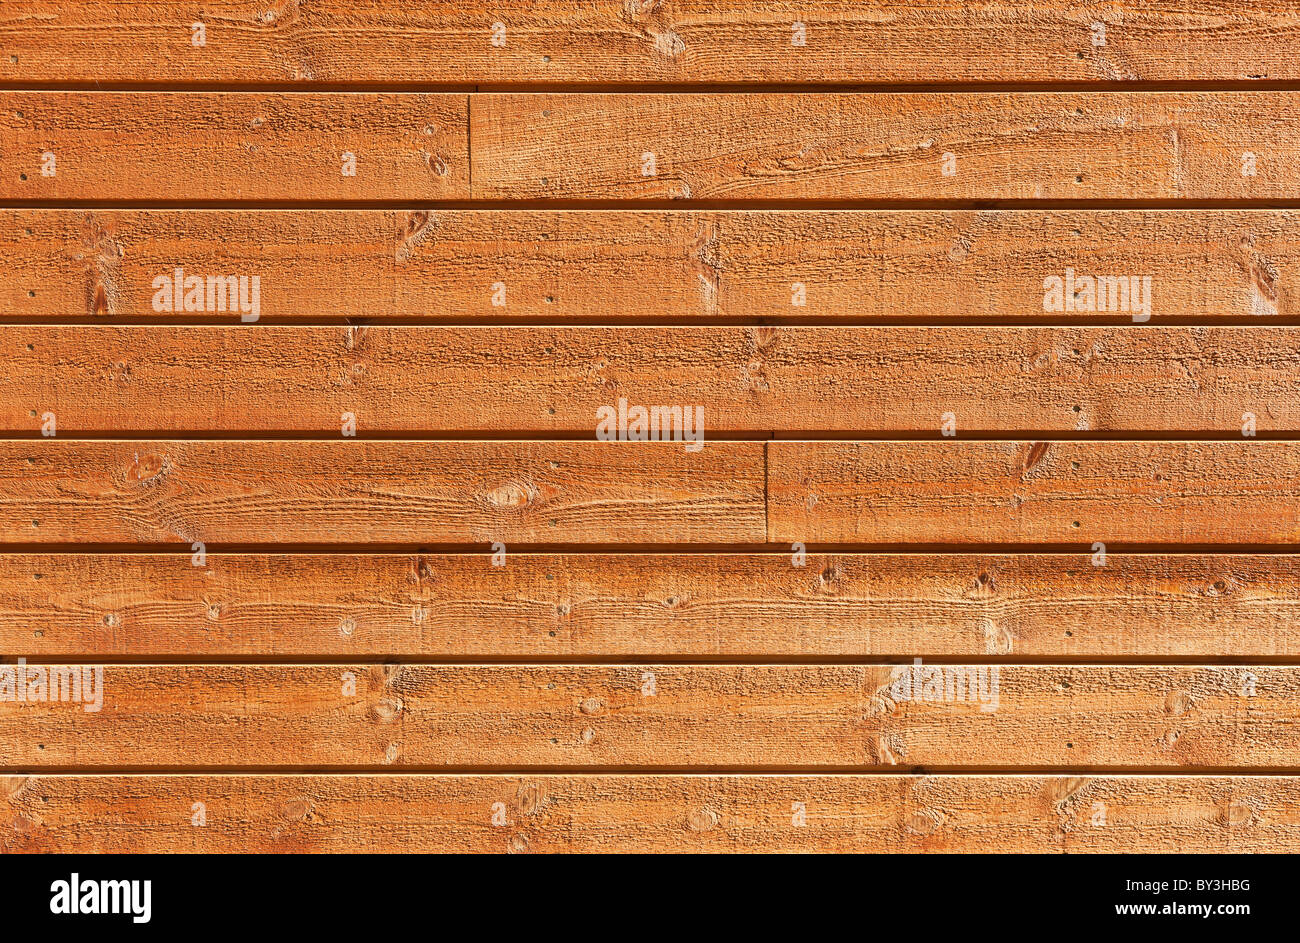 Perfectly lit brand new wooden background Stock Photo